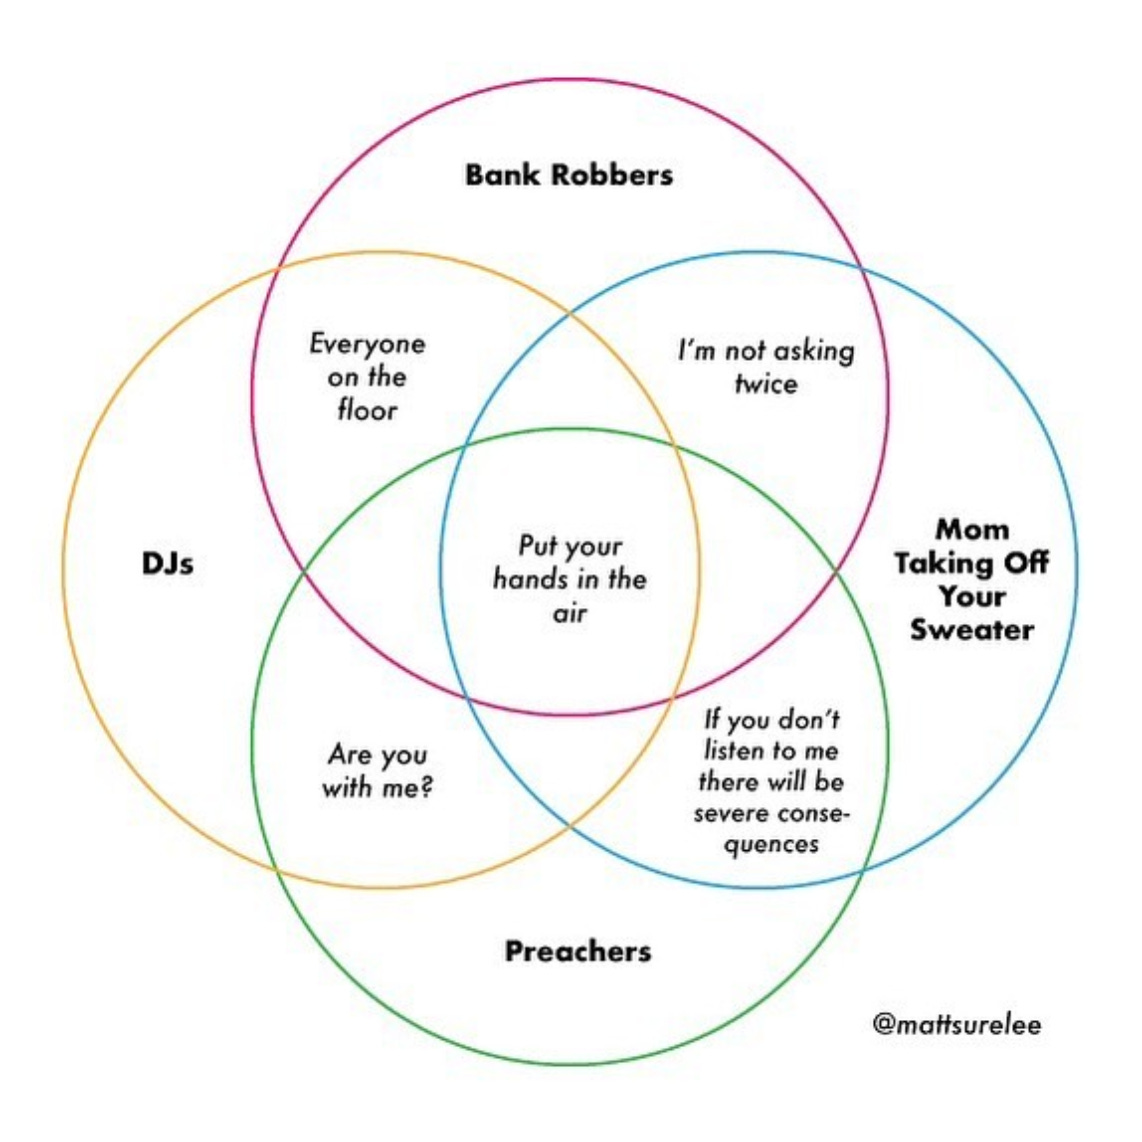 A venn diagram with four circles by @mattsurelee. The top circle is red and says "bank robbers". It shares "I'm not asking twice" with a blue circle that says "Mom Taking Off Your Sweater". That circle shares "if you don't listen to me there will be consequences" with a green circle that says "Preachers". The green circle shares "Are you with me?" with a yellow circle that says "DJs", which shares "Everyone on the floor" with the red bank robbers circle. All 4 circles share "Put your hands in the air" in the center.